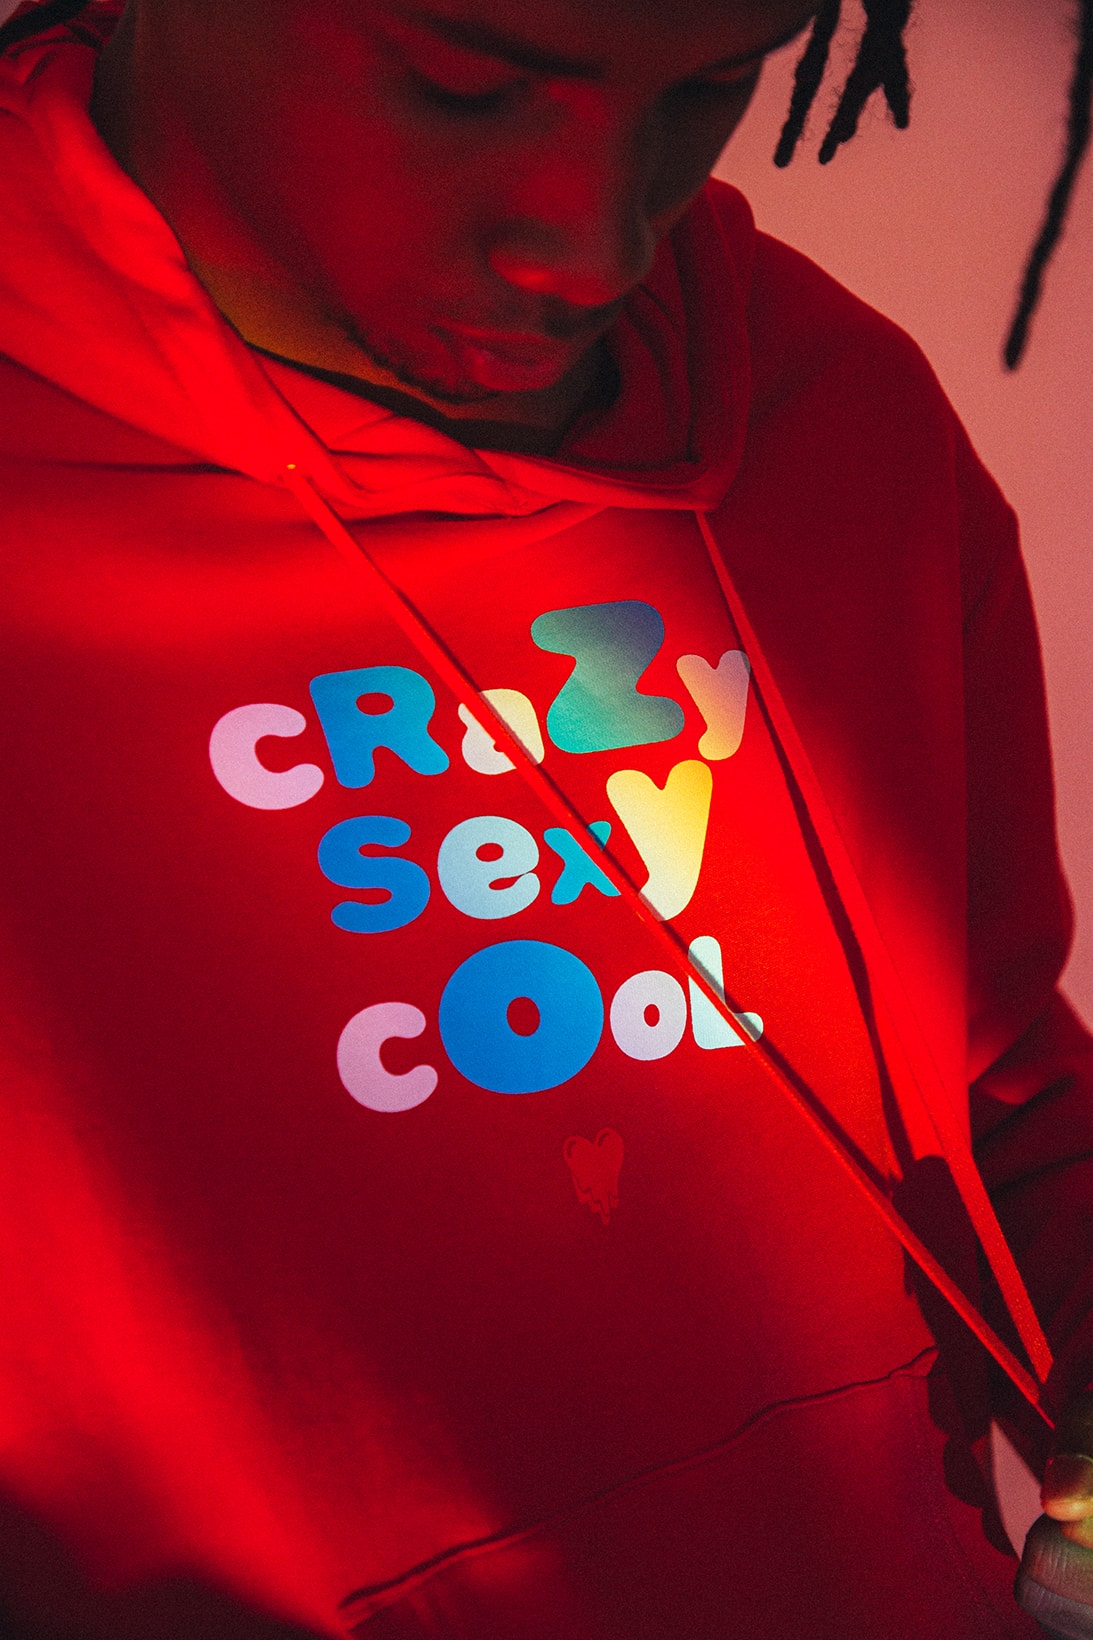 clot emotionally unavailable crazysexycool collaboration red hoodie